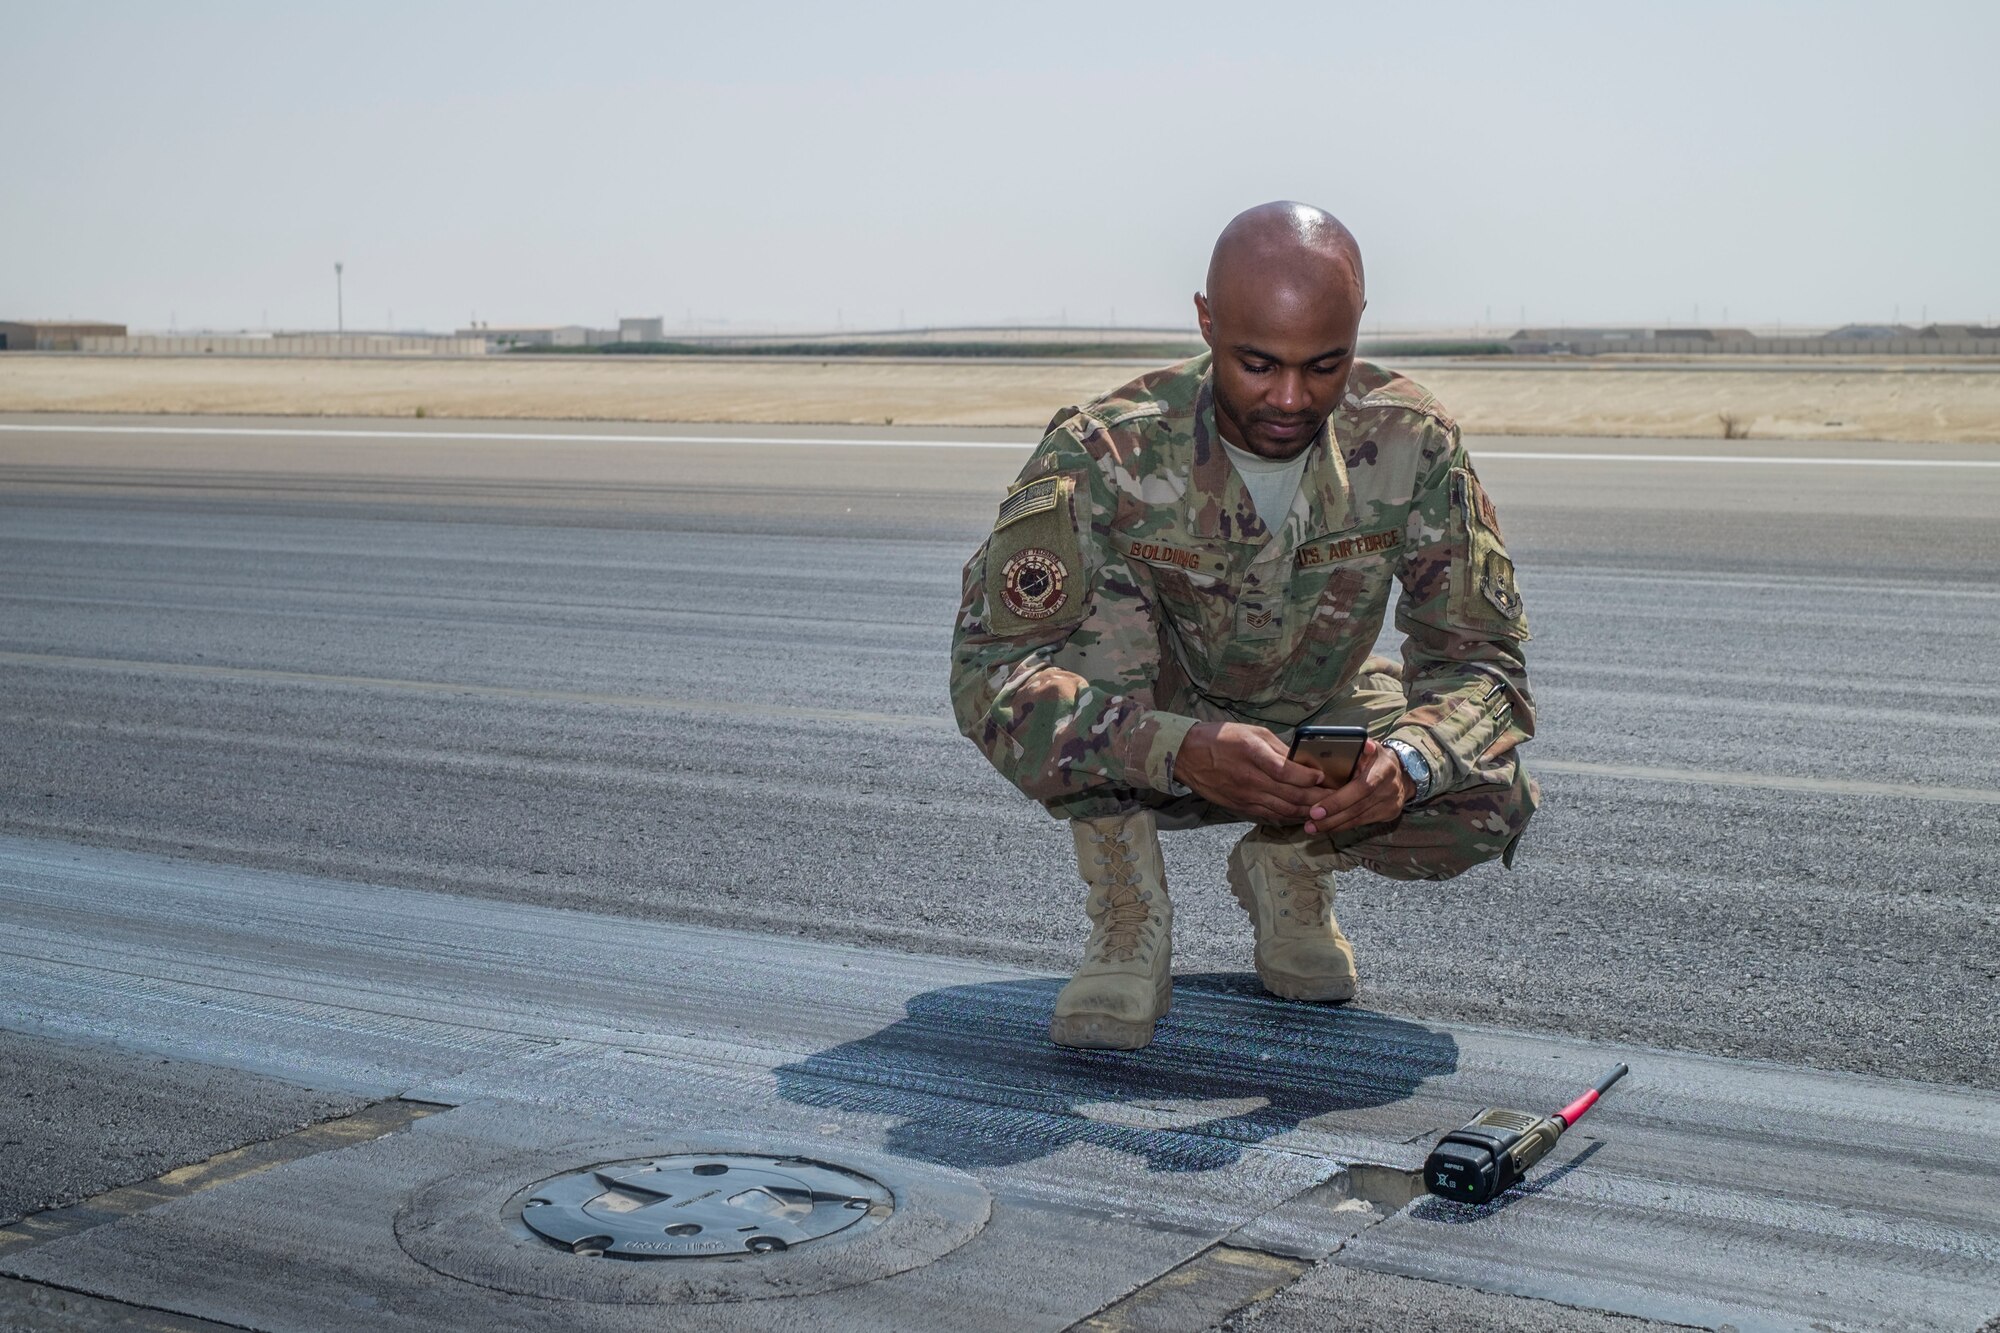 Staff Sgt. Dionta Bolding, 380th Expeditionary Operations Support Squadron deputy airfield manager, takes a photo of a spall, a small pothole or imperfection on a flightline, September 21, 2017, at Al Dhafra Air Base, United Arab Emirates.